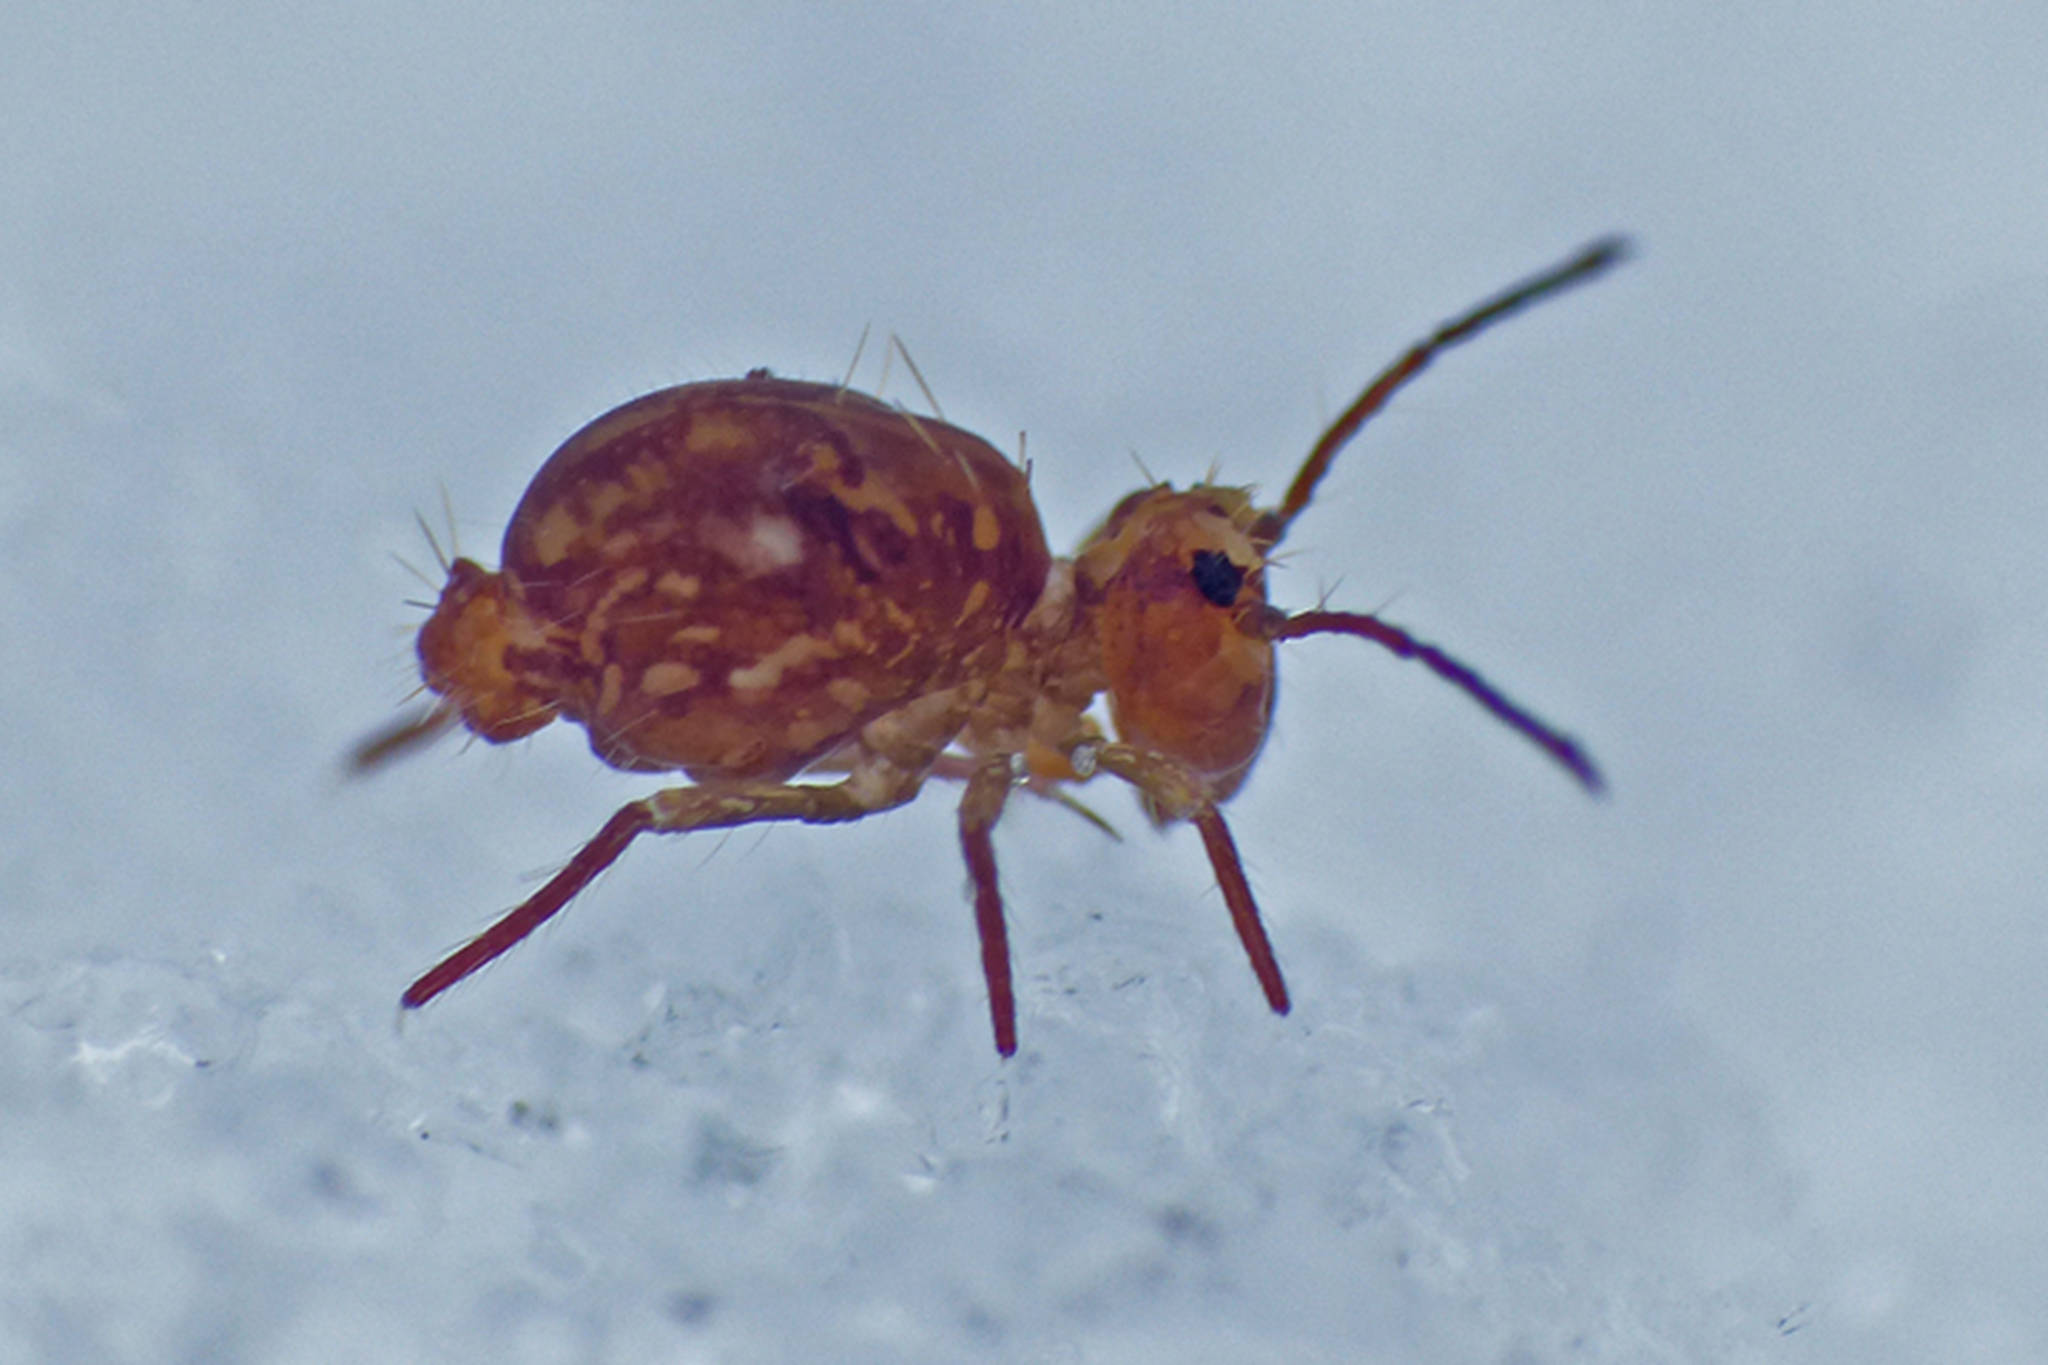 Springtails are non-insect arthropod. Most springtails can hop about using a forked appendage on the abdomen. They are among several arthropods that are active in the snow. (Courtesy Photo / Bob Armstrong)